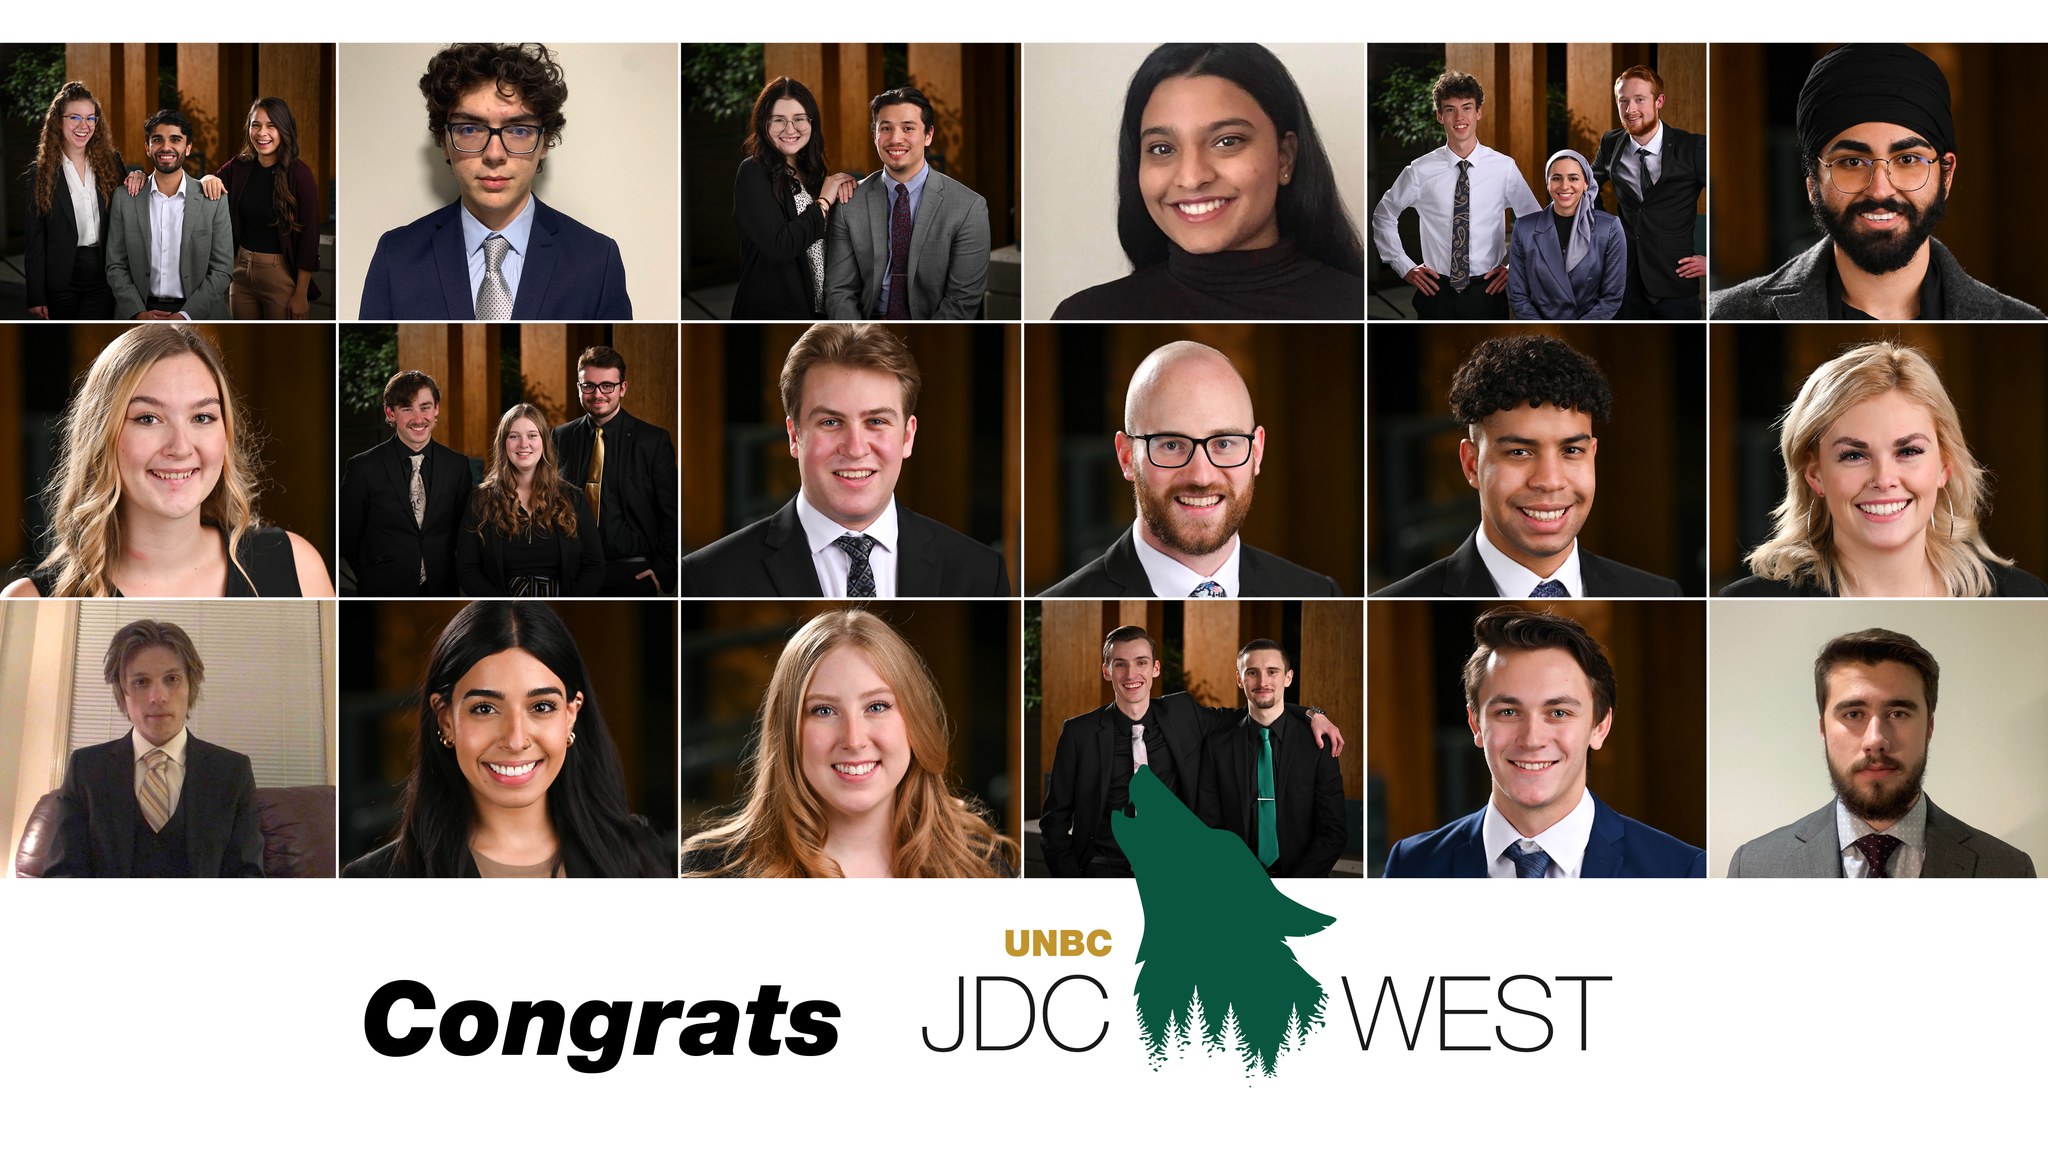 UNBC JDC West team places high in recent competition